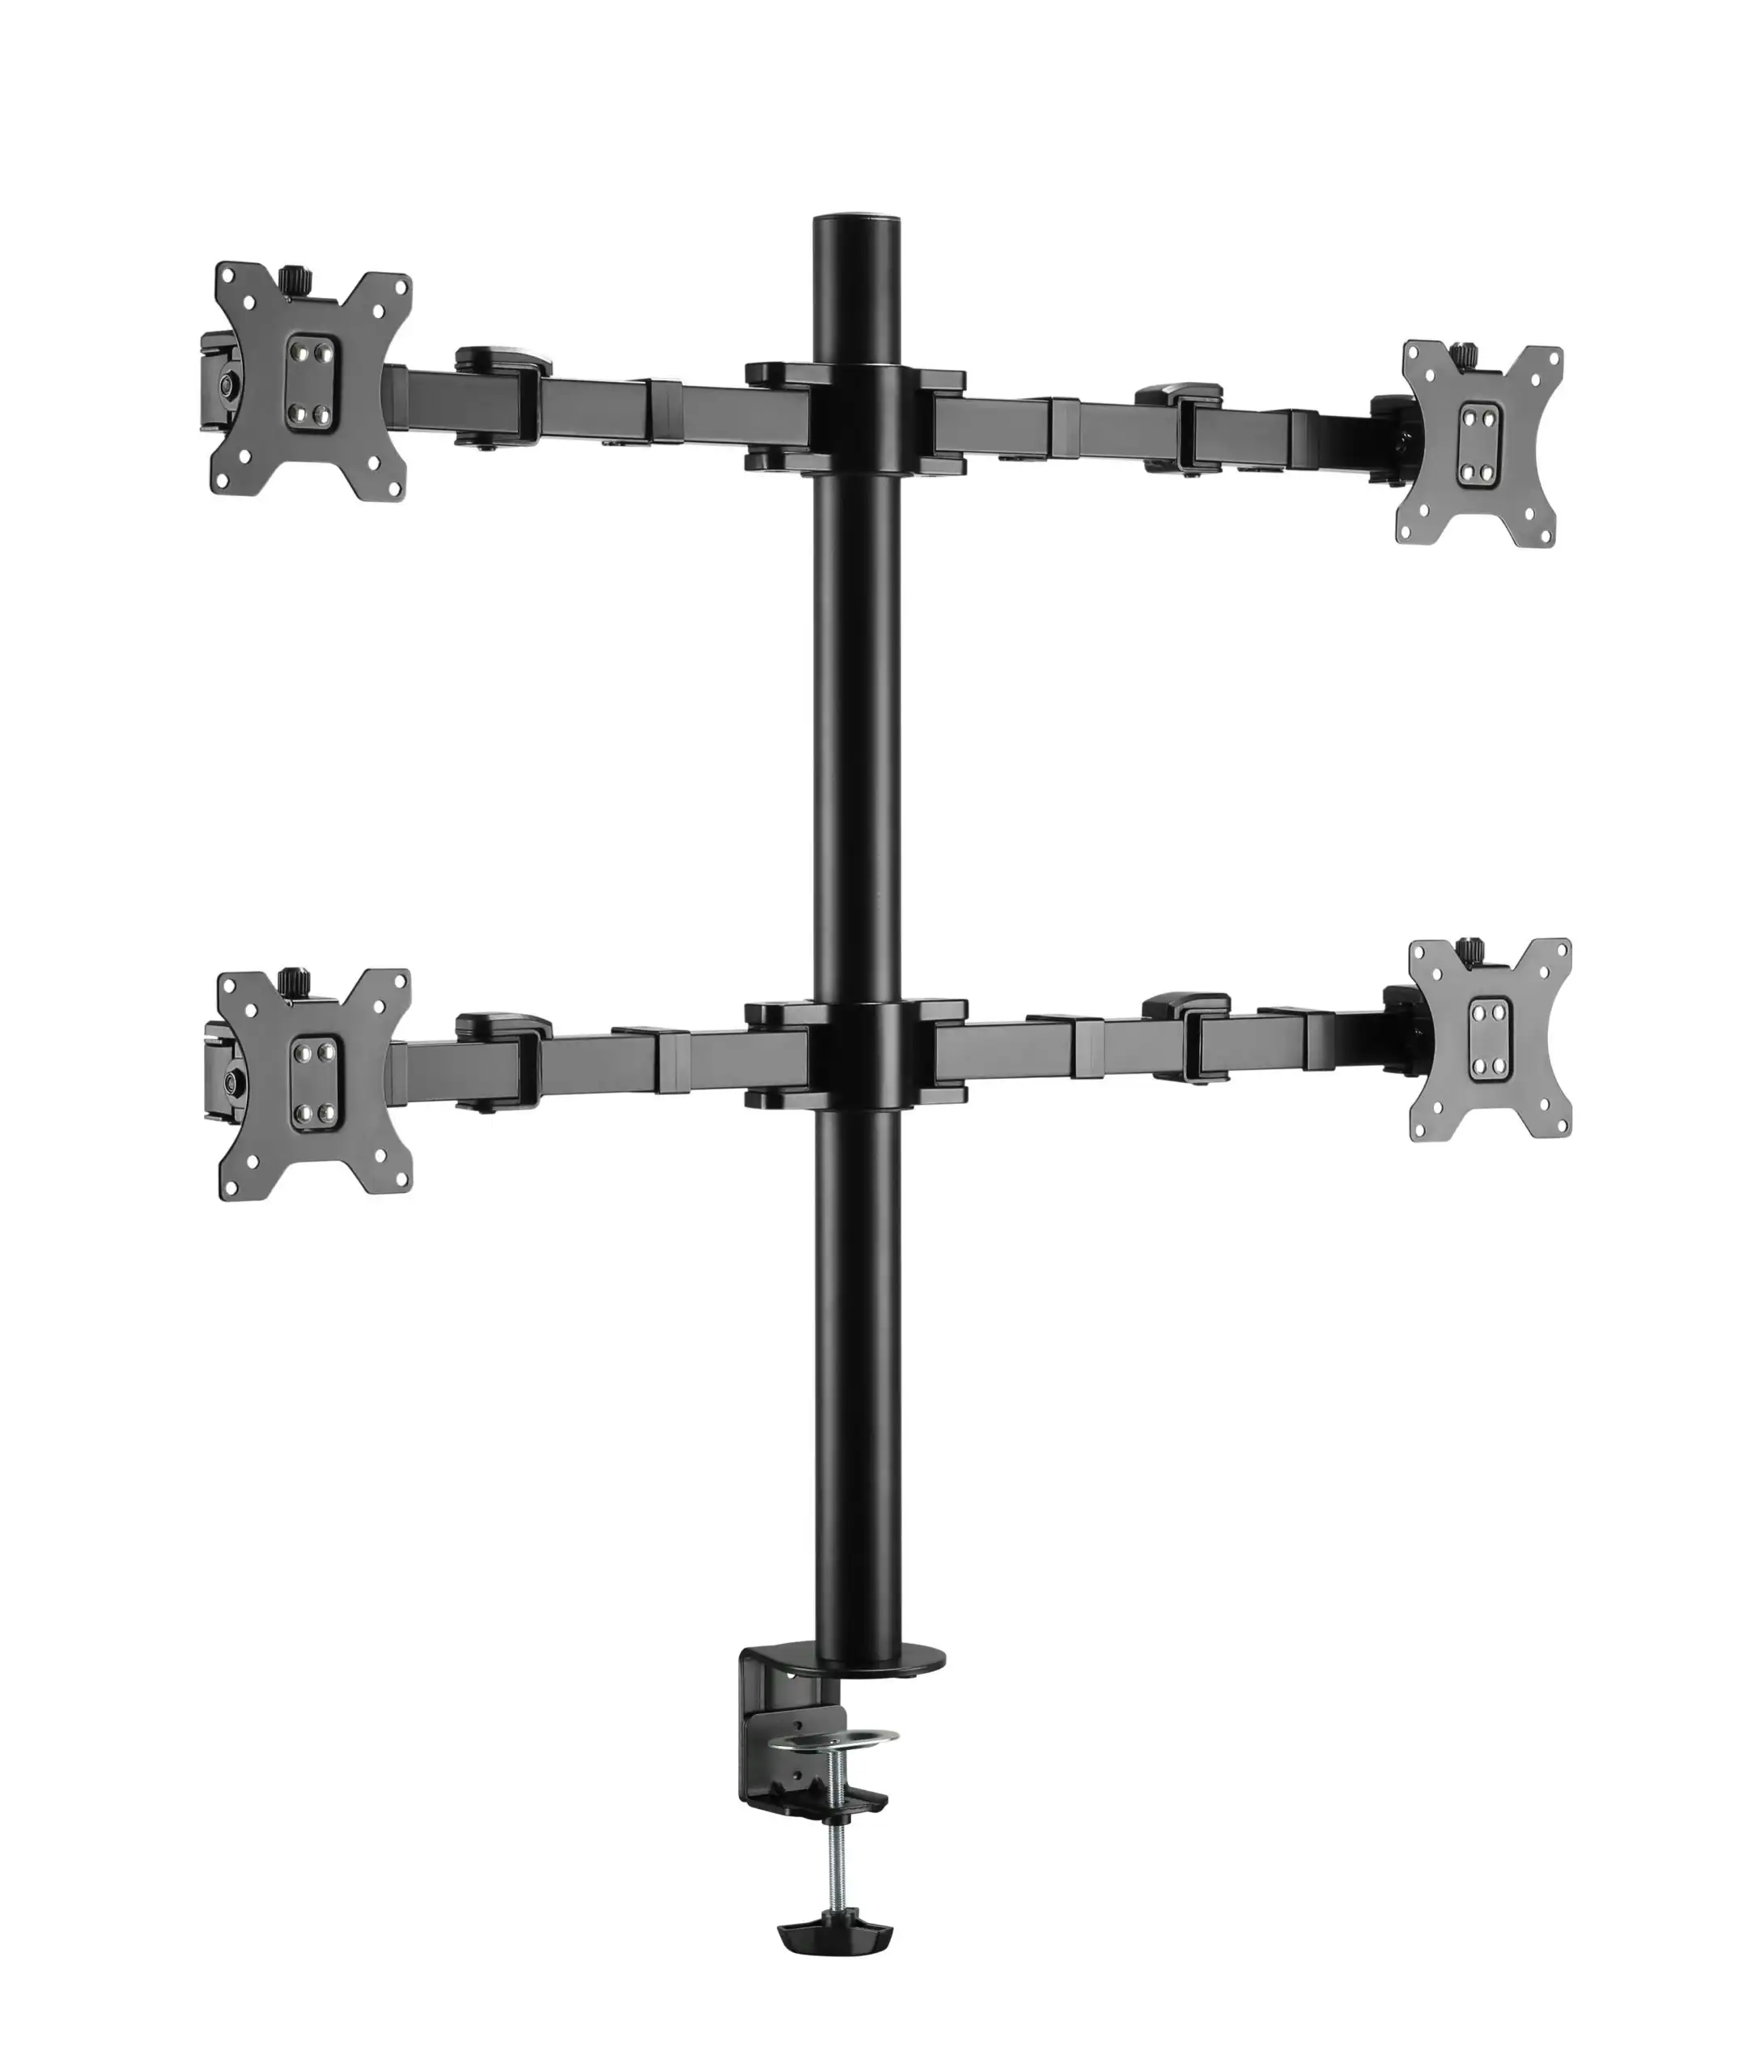 Brateck Quad Monitors Affordable Steel Articulating Monitor Arm